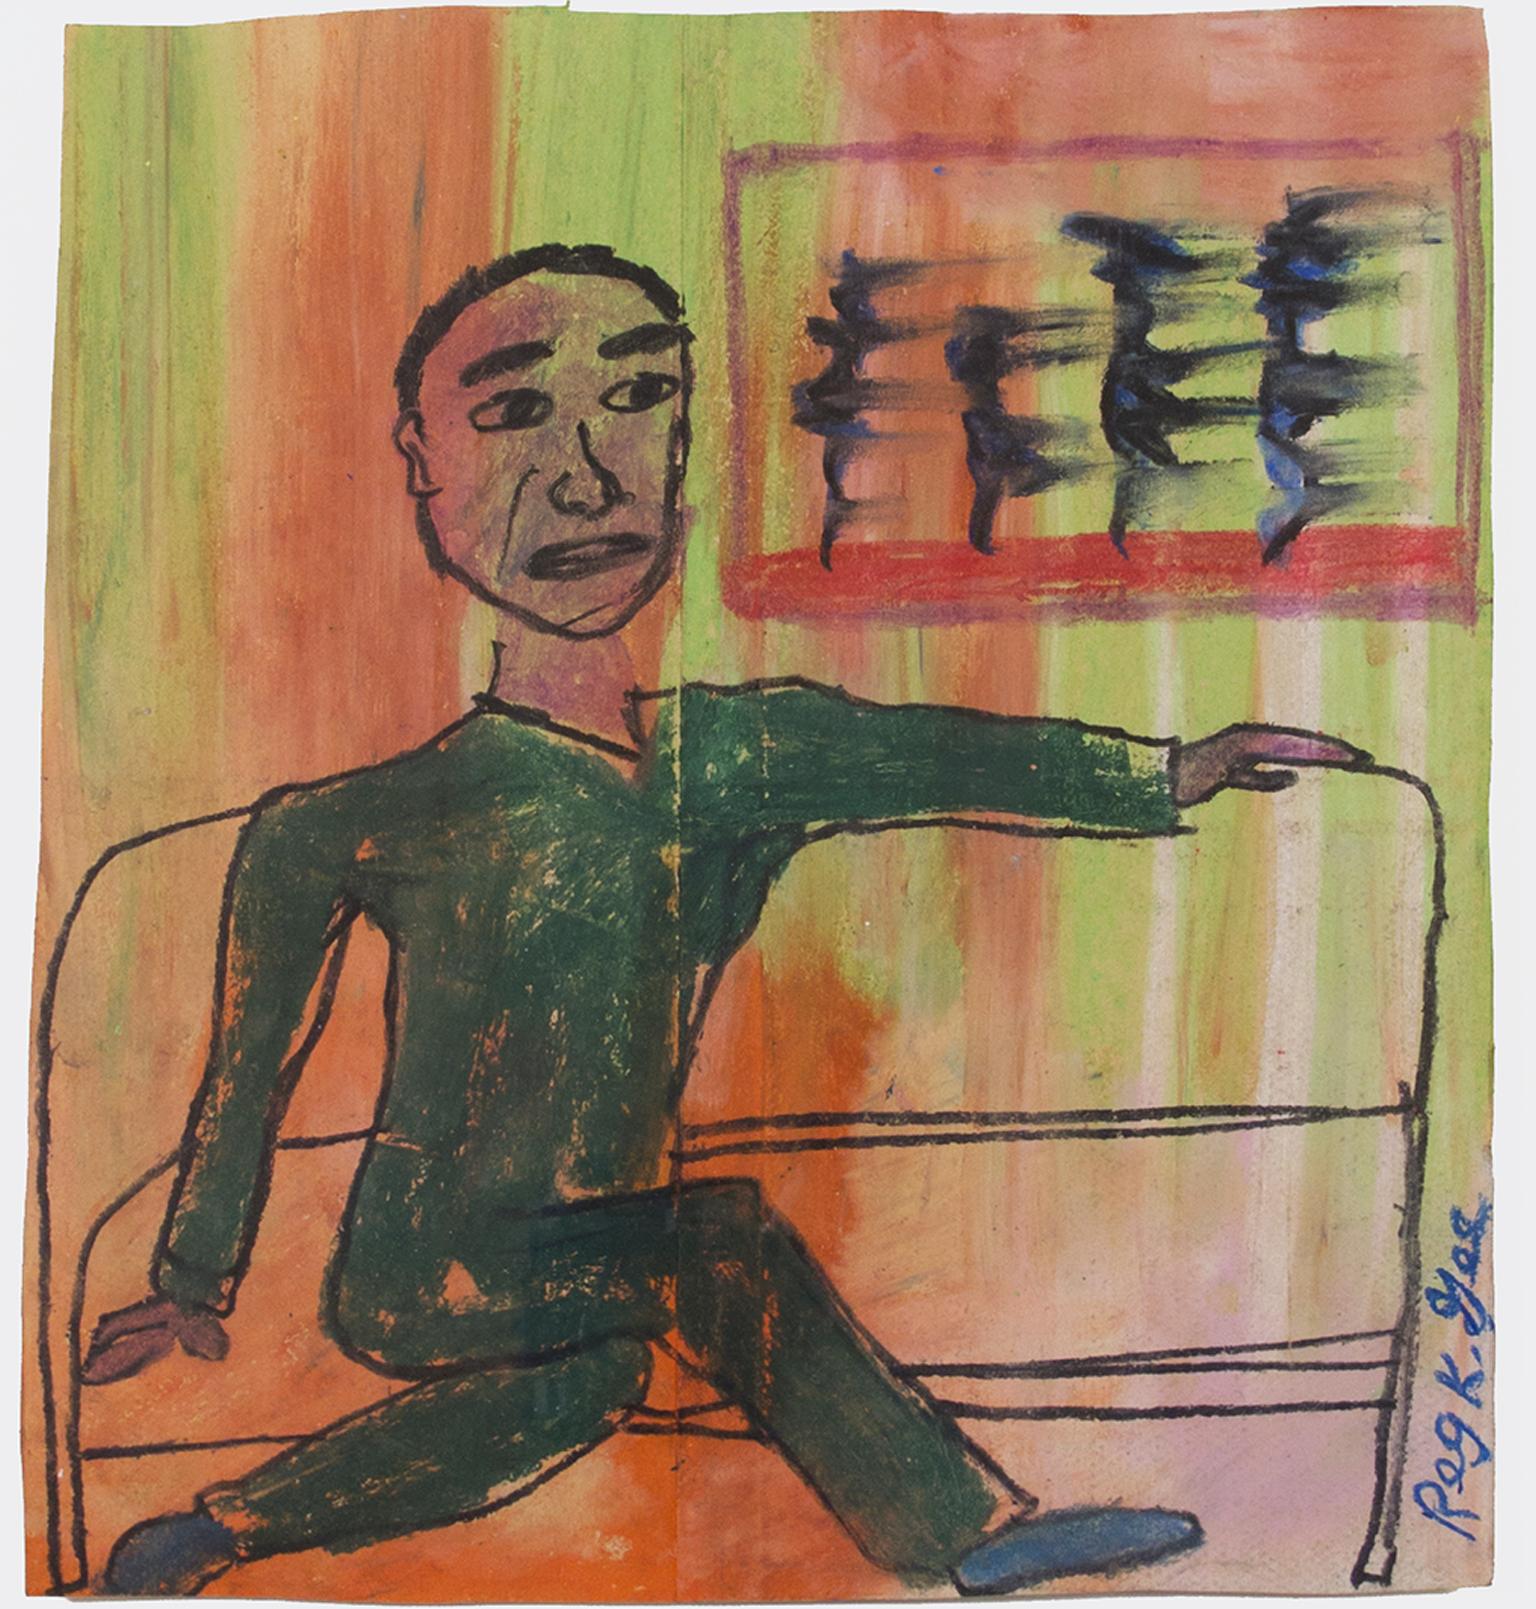 "Man on Express" is an original oil pastel drawing on a grocery bag by Reginald K. Gee. The artist signed the piece in the lower right margin. It features a man in a green suit lounging on a train. The background is neon green and orange. 

13 1/2"